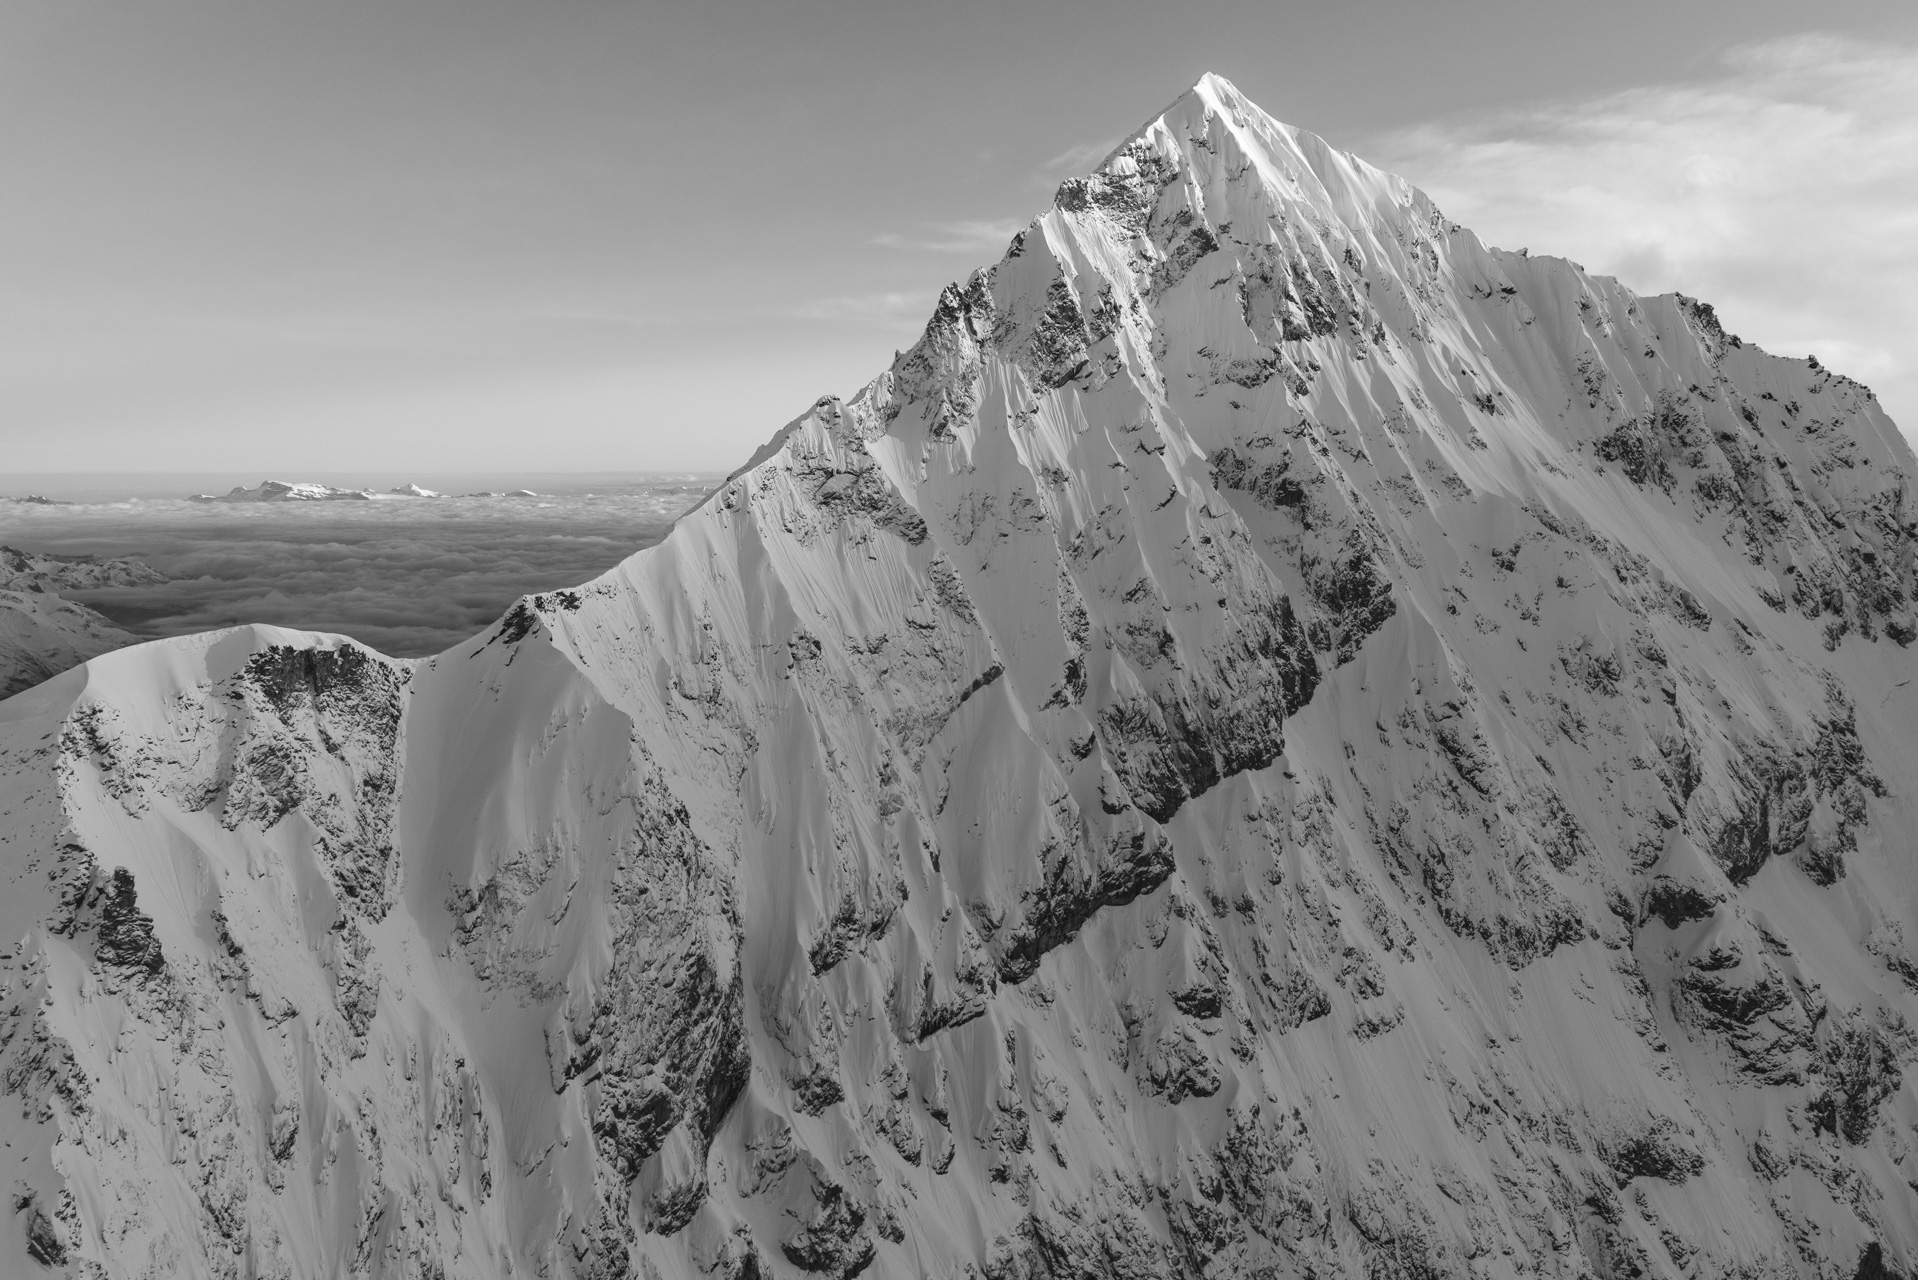 Black and white mountain photo after a storm on The Dent Blanche seen from Zermatt